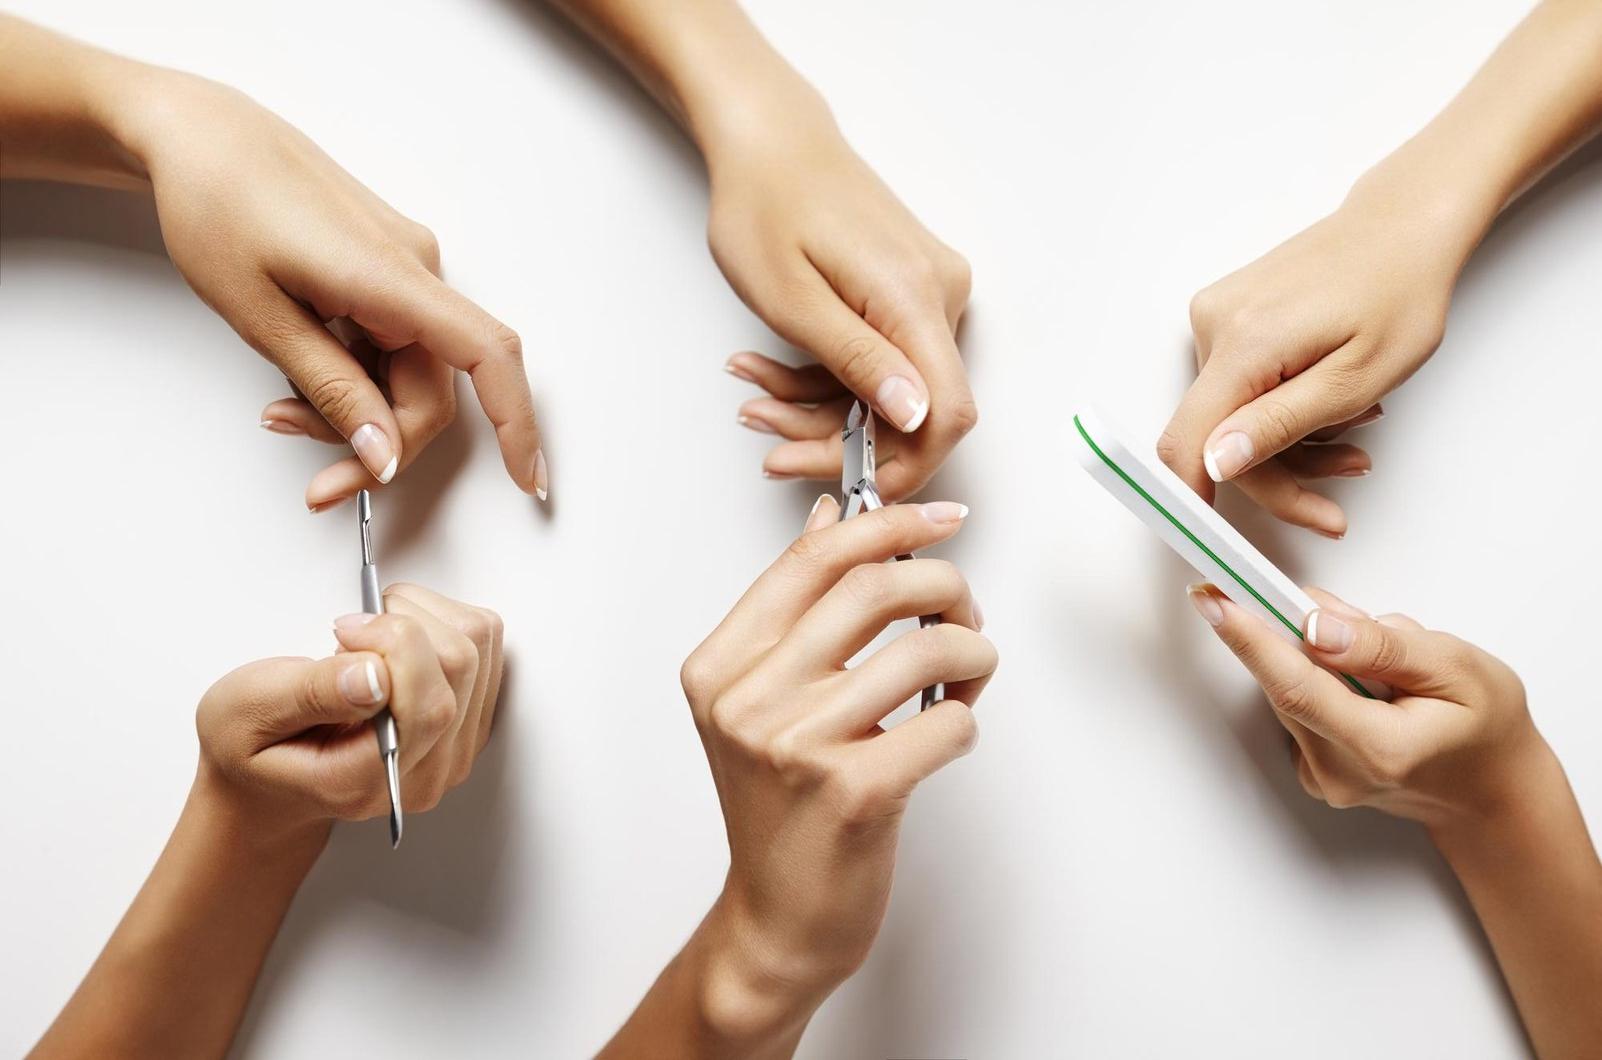 If at least two techniques are used, the manicure is considered combined.